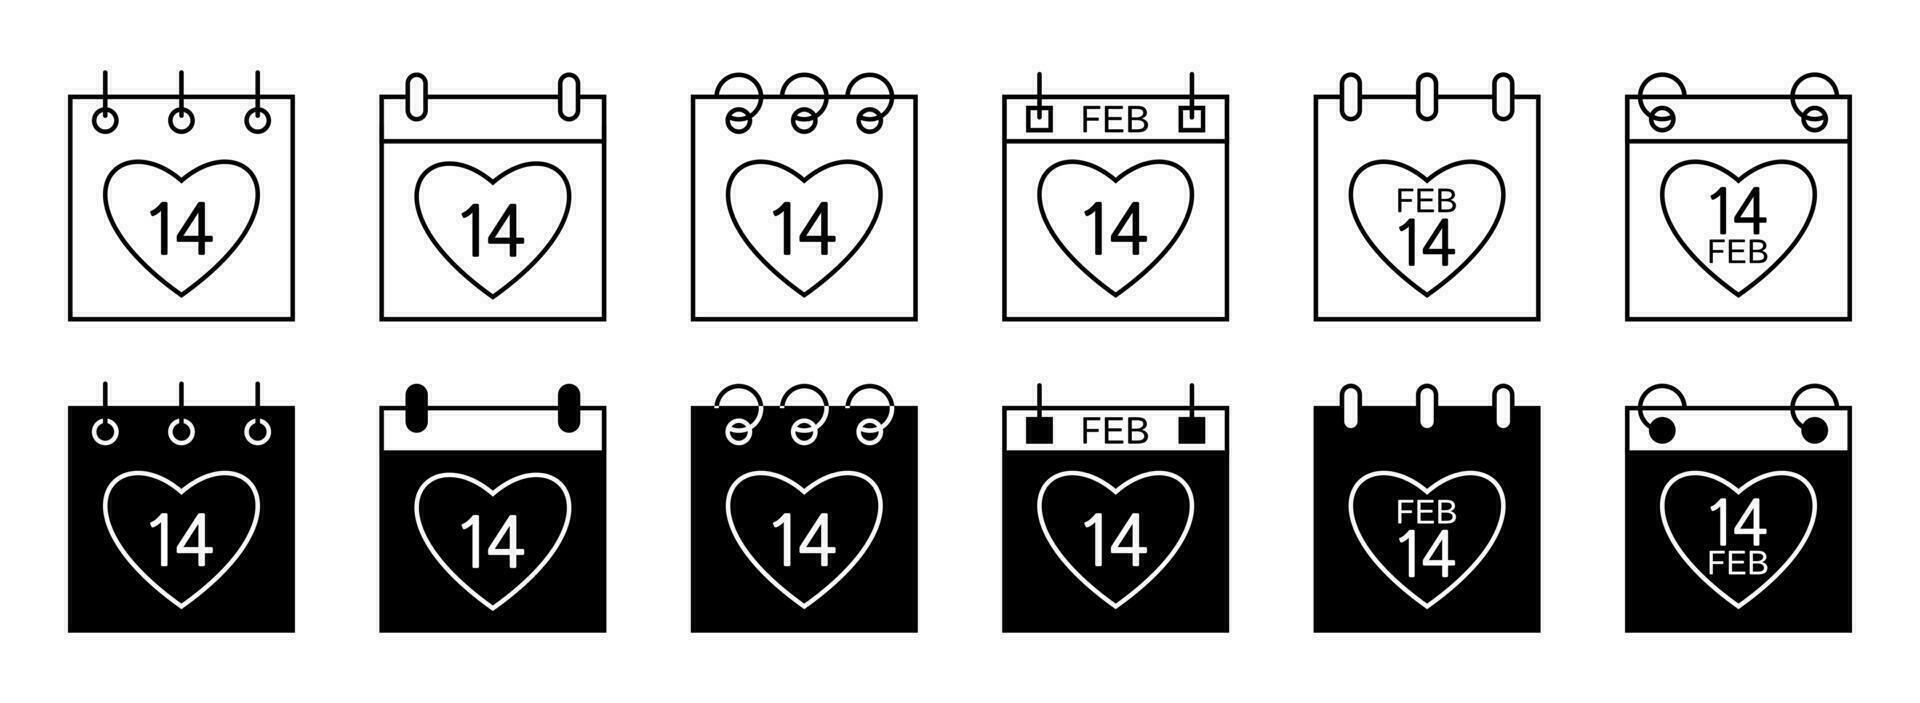 valentine's day calendar icon collection, with heart symbol. flat design isolated on white background. vector illustration